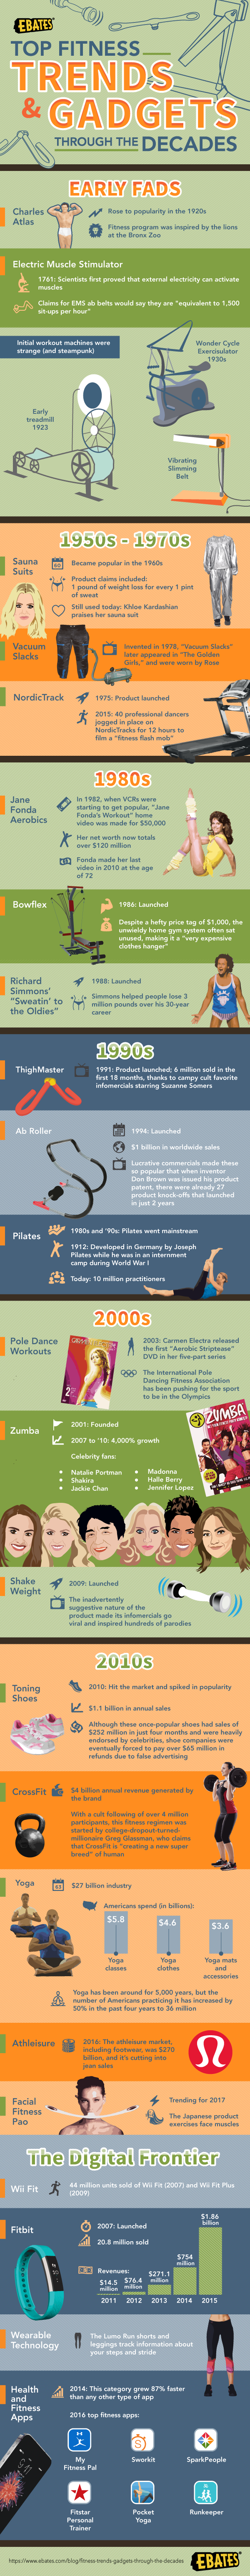 Top Fitness Trends and Gadgets Through the Decades